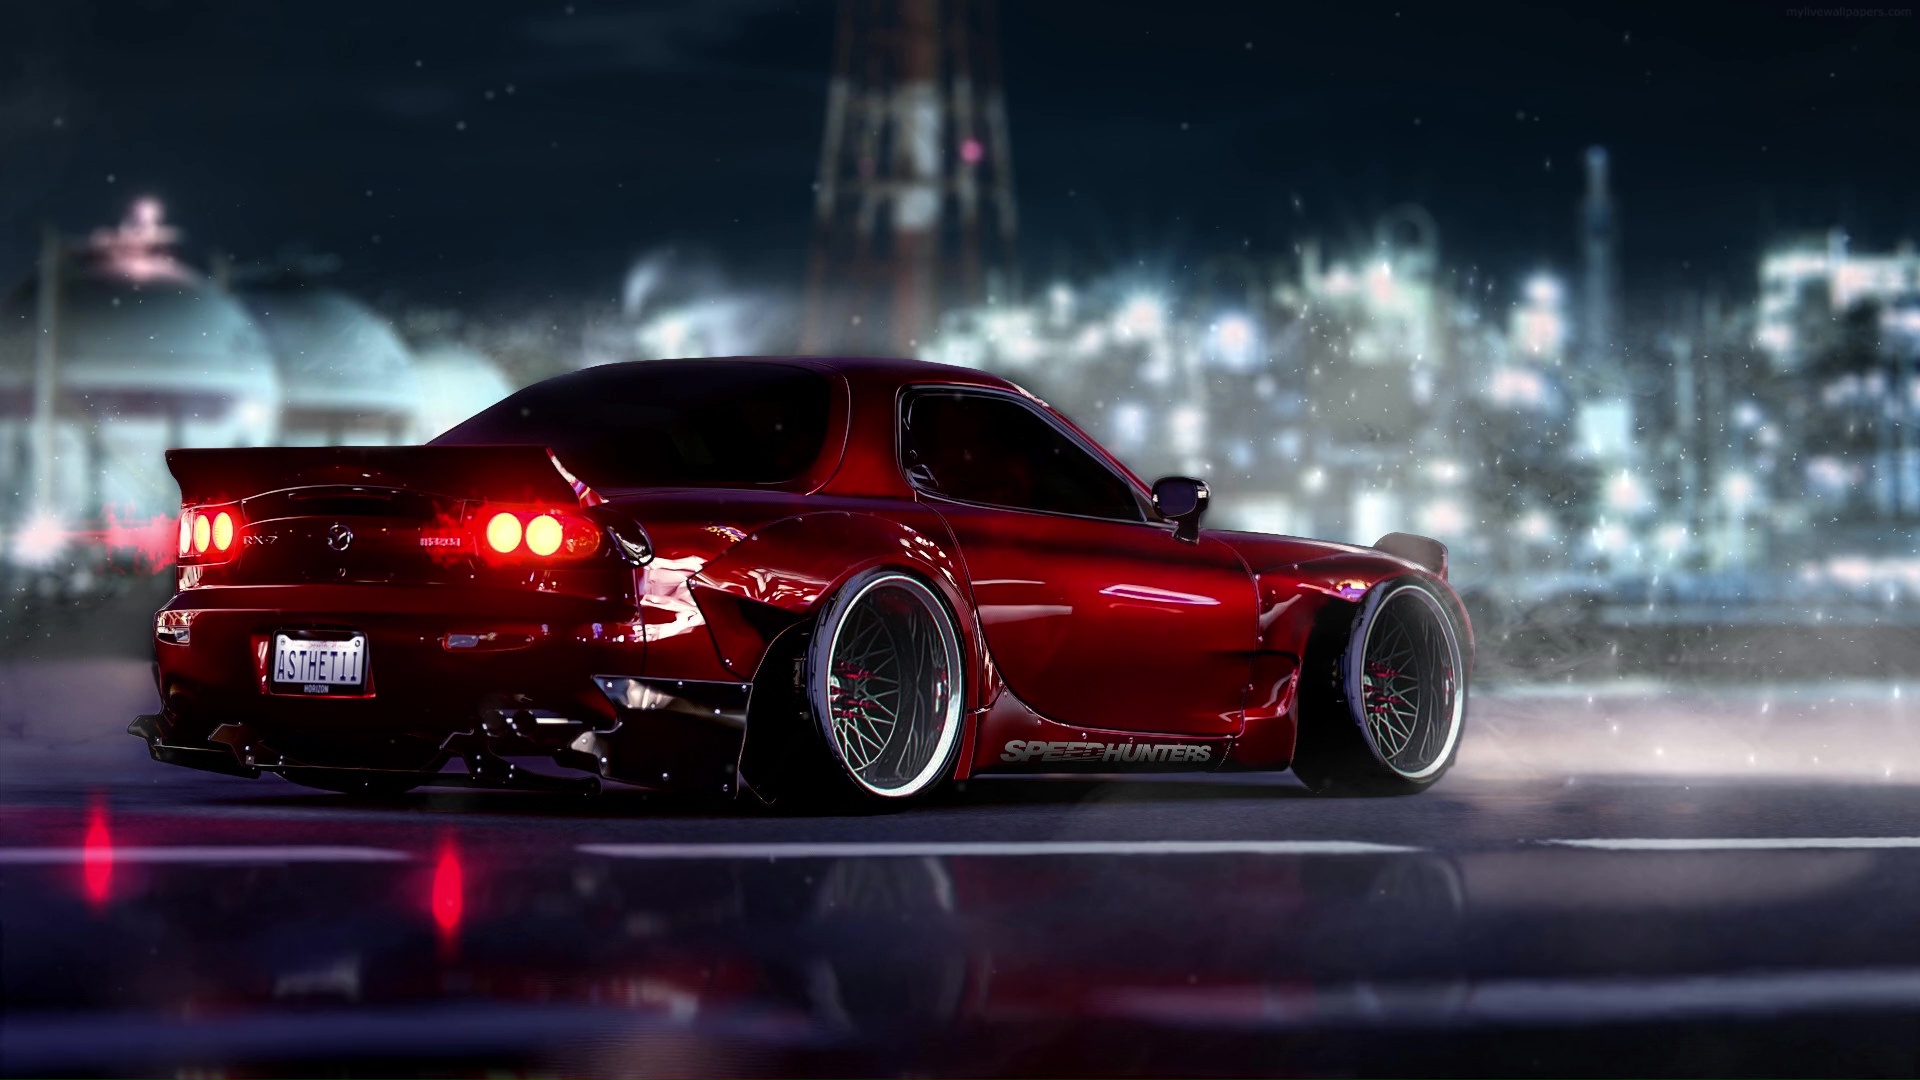 1920x1080 rx7, wallpaper, wallpapers, Car, drift, drift, car, redbull, mad  mike, mazda - Coolwallpapers.me!